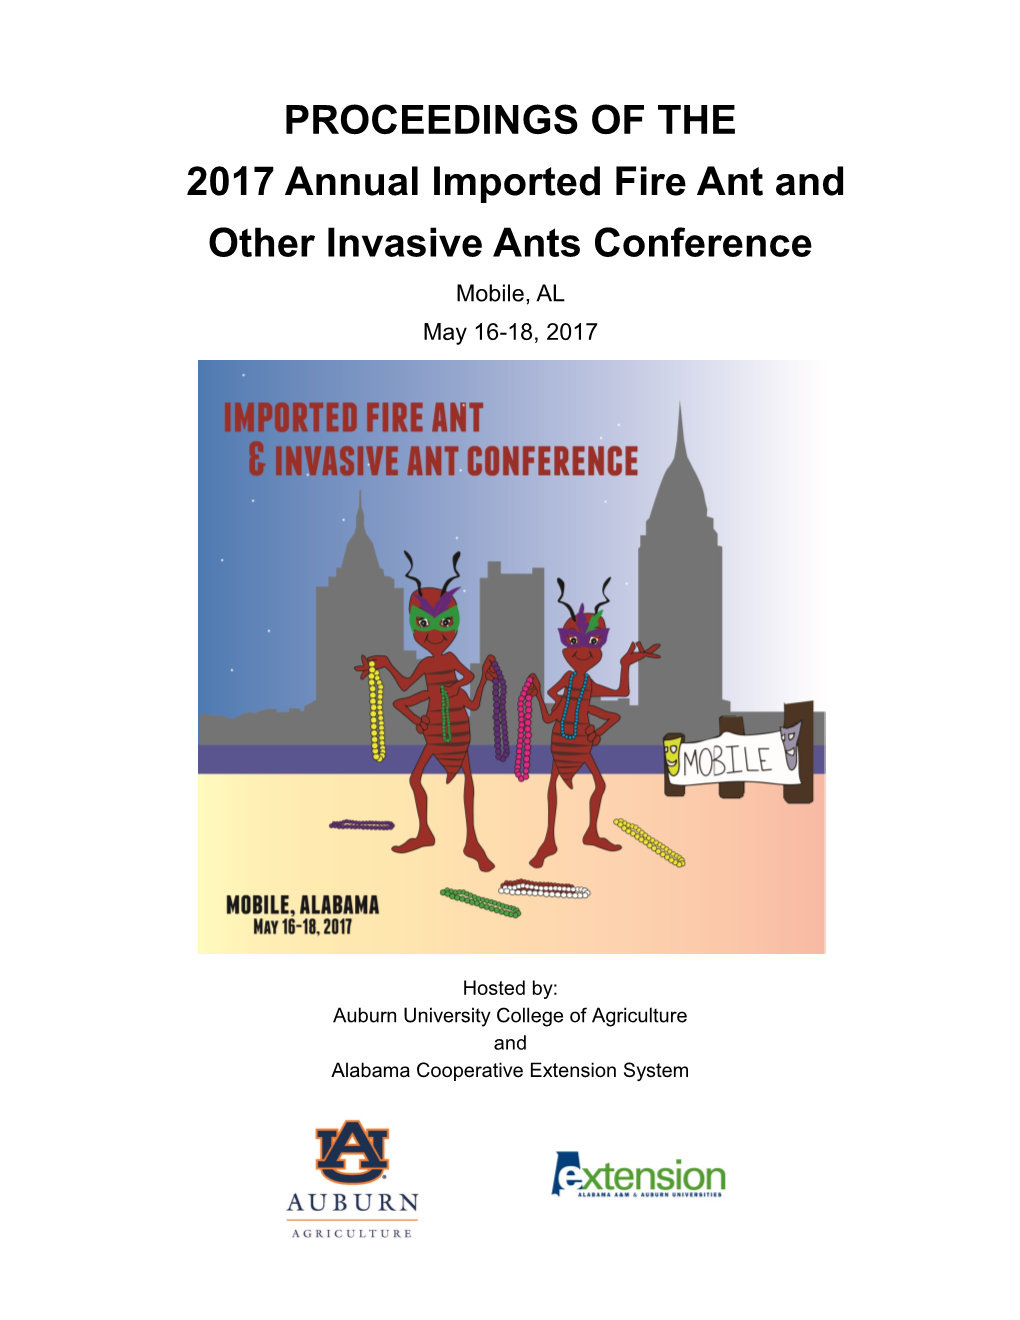 2017 Proceedings of the Imported Fire Ant and Invasive Ant Conference